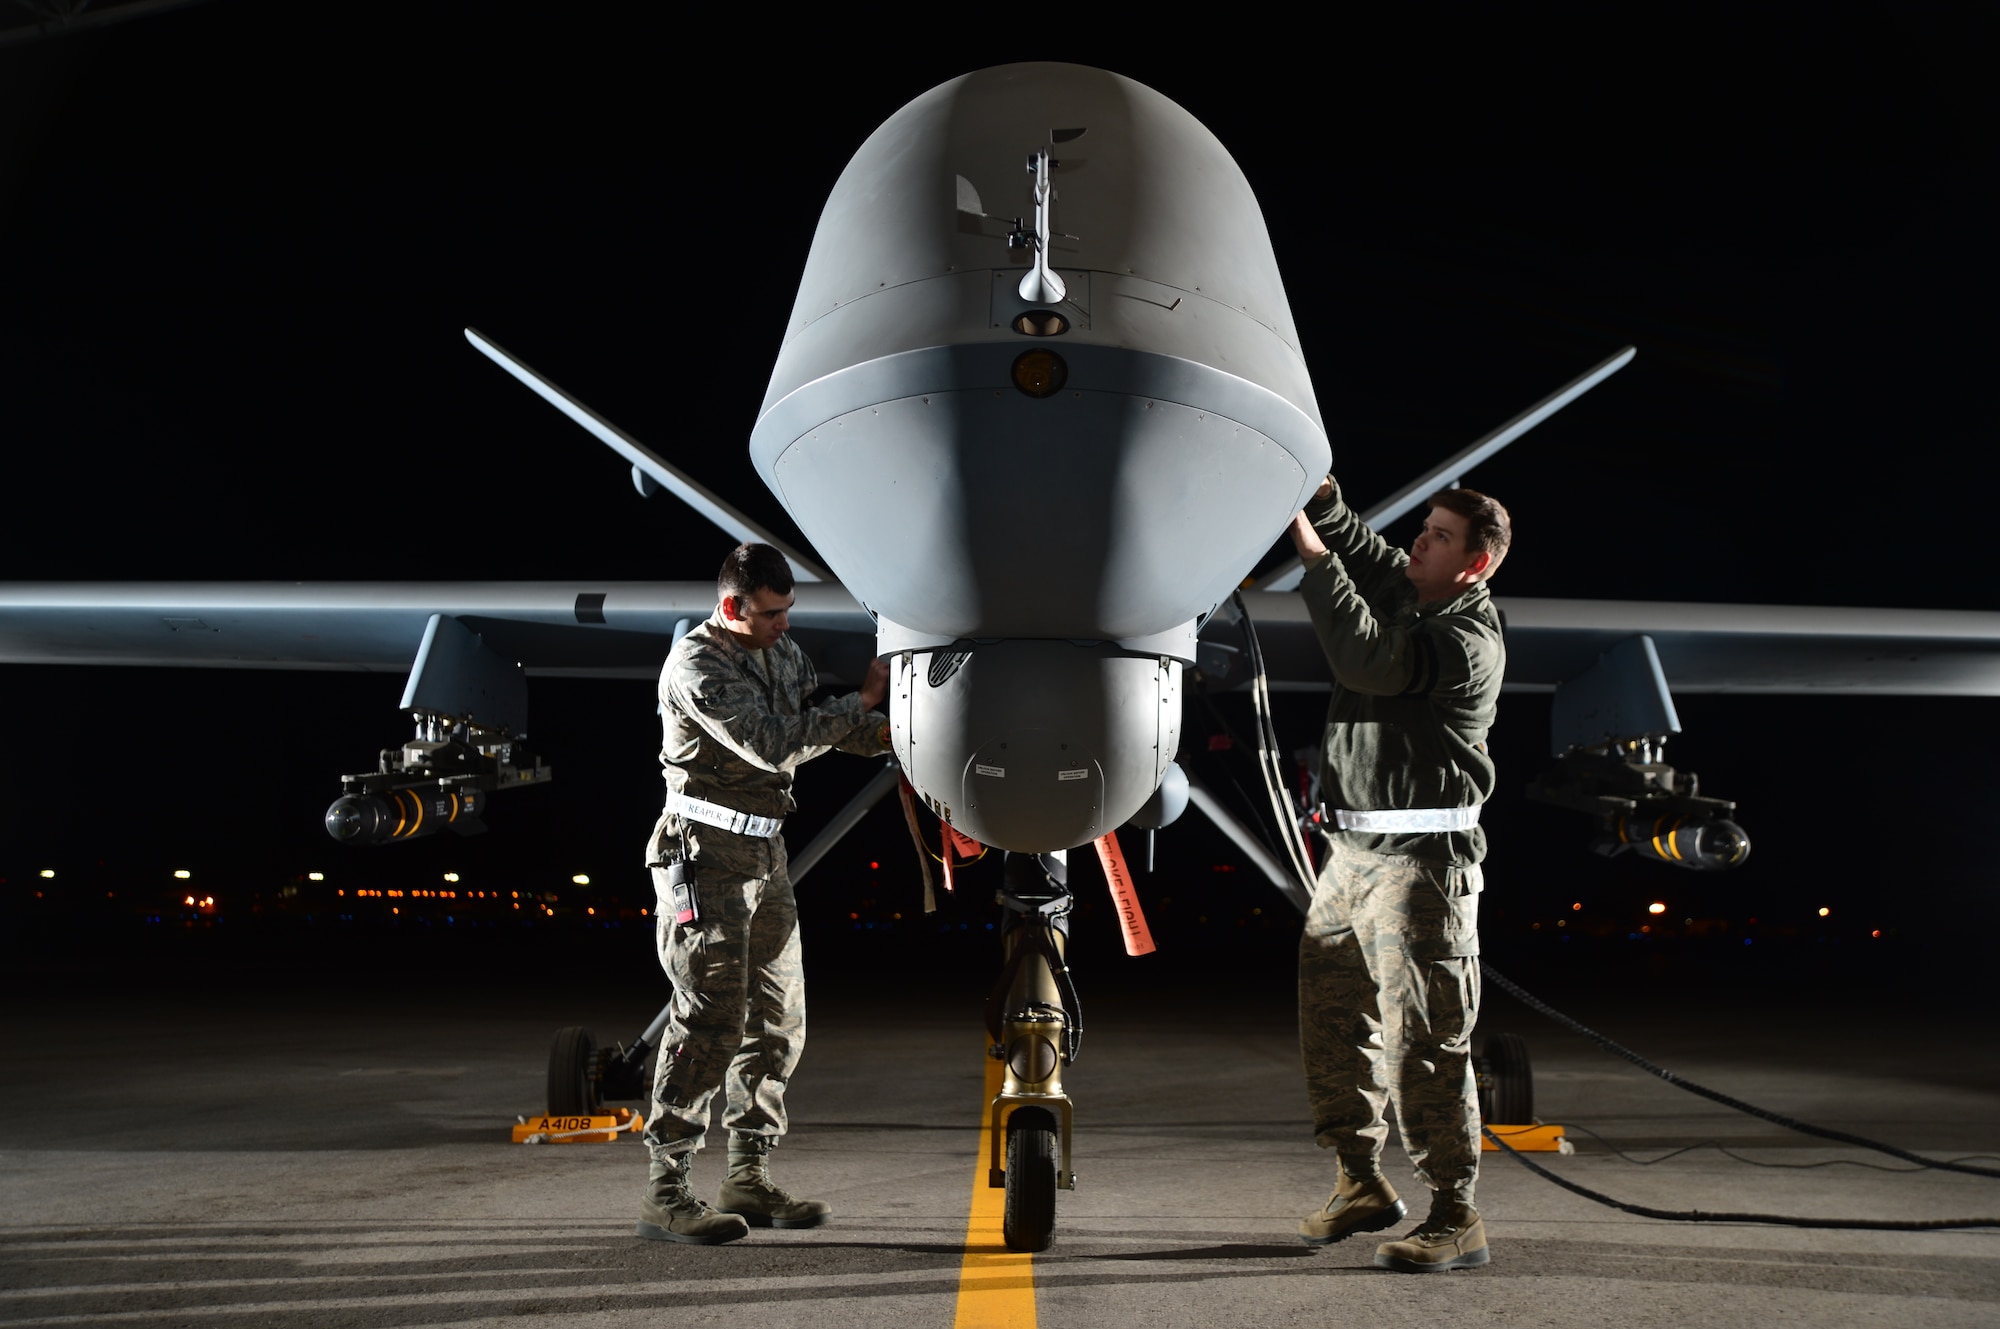 Airman 1st Class Steven, 432nd Aircraft Maintenance Squadron MQ-9 Reaper crew chief (left), and Airman 1st Class Taylor, 432nd Aircraft Maintenance Squadron MQ-9 Reaper crew chief (right), prepare an MQ-9 Reaper for flight during Combat Hammer May 15, 2014, Creech Air Force Base, Nev. Fighter, bomber and remotely piloted aircraft units around the Air Force are evaluated four times a year and provided weapons, airspace and targets from Hill AFB, Utah, or Eglin AFB, Fla. (U.S. Air Force photo by Staff Sgt. N.B./Released)